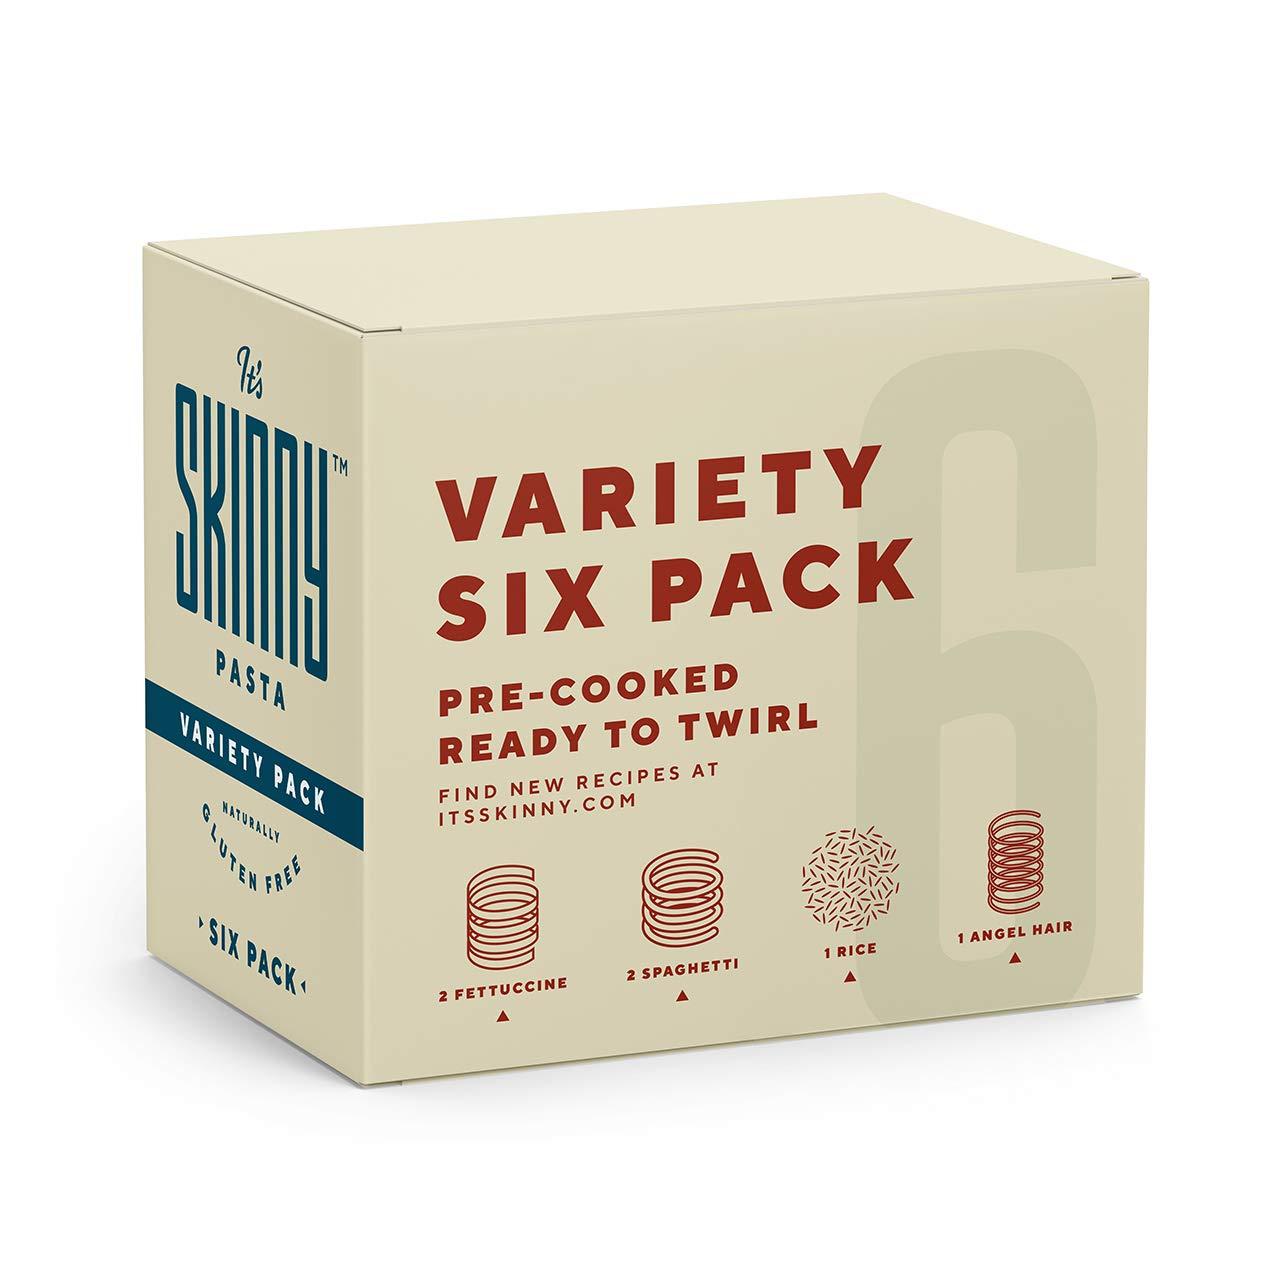  It's Skinny Variety Pack — Healthy, Low-Carb, Low Calorie  Konjac Pasta — Fully Cooked and Ready to Eat — Keto, Gluten Free, Vegan,  and Paleo-Friendly (6-Pack)